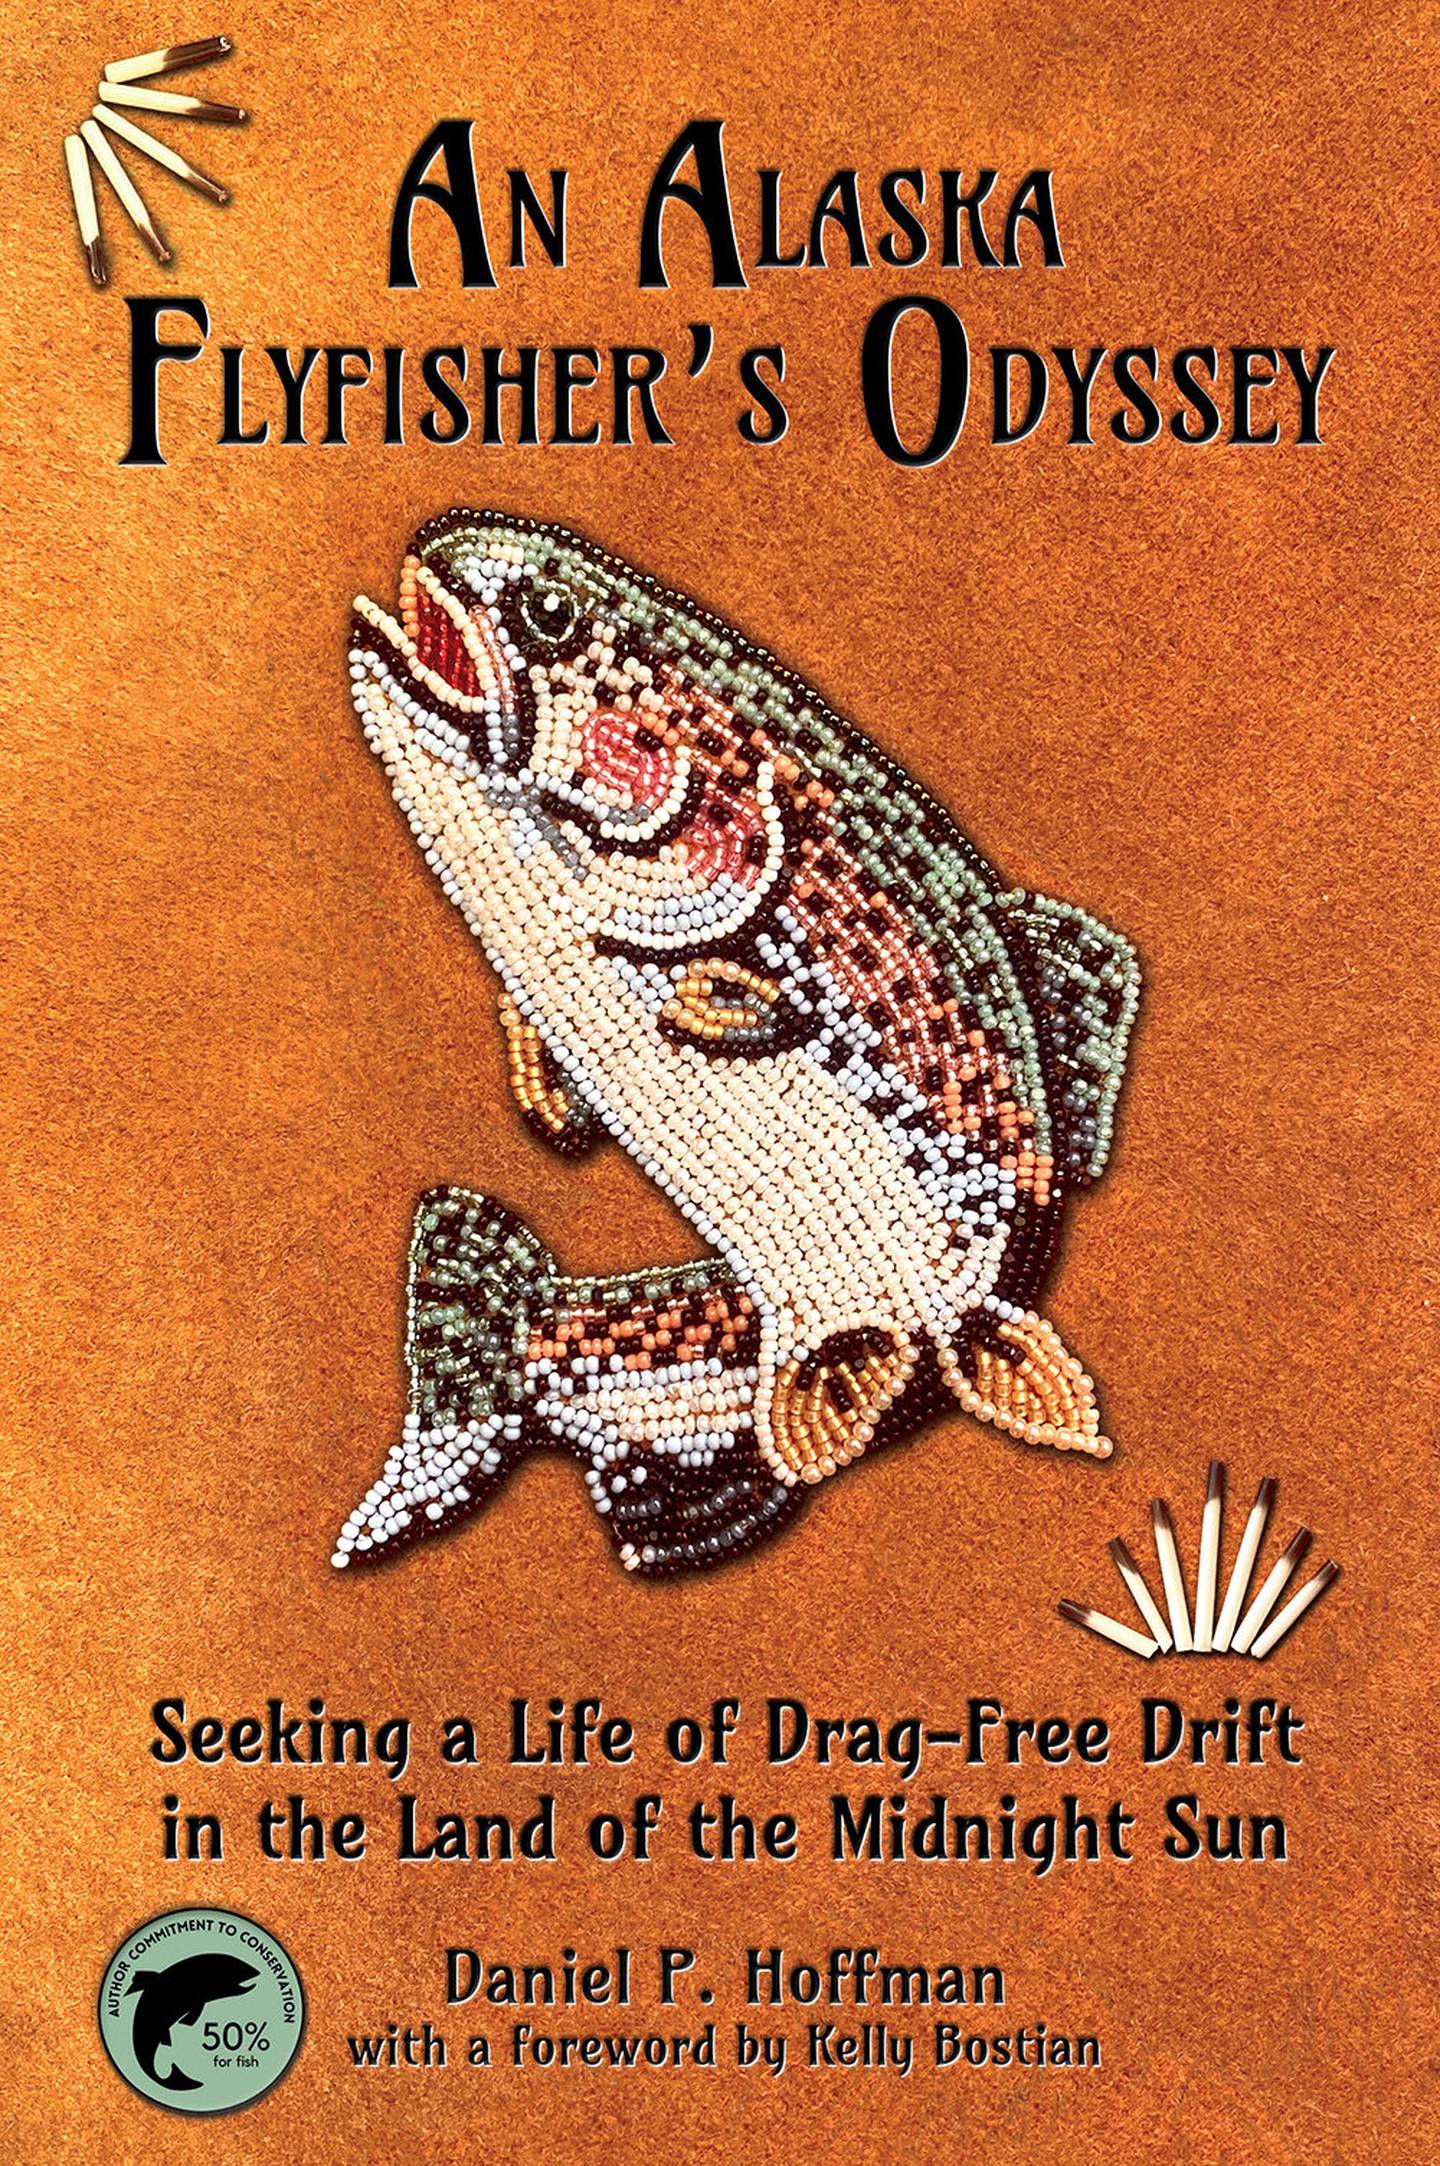 An Alaska Flyfisher’s Odyssey: Seeking a Life of Drag-Free Drift in the Land of the Midnight Sun